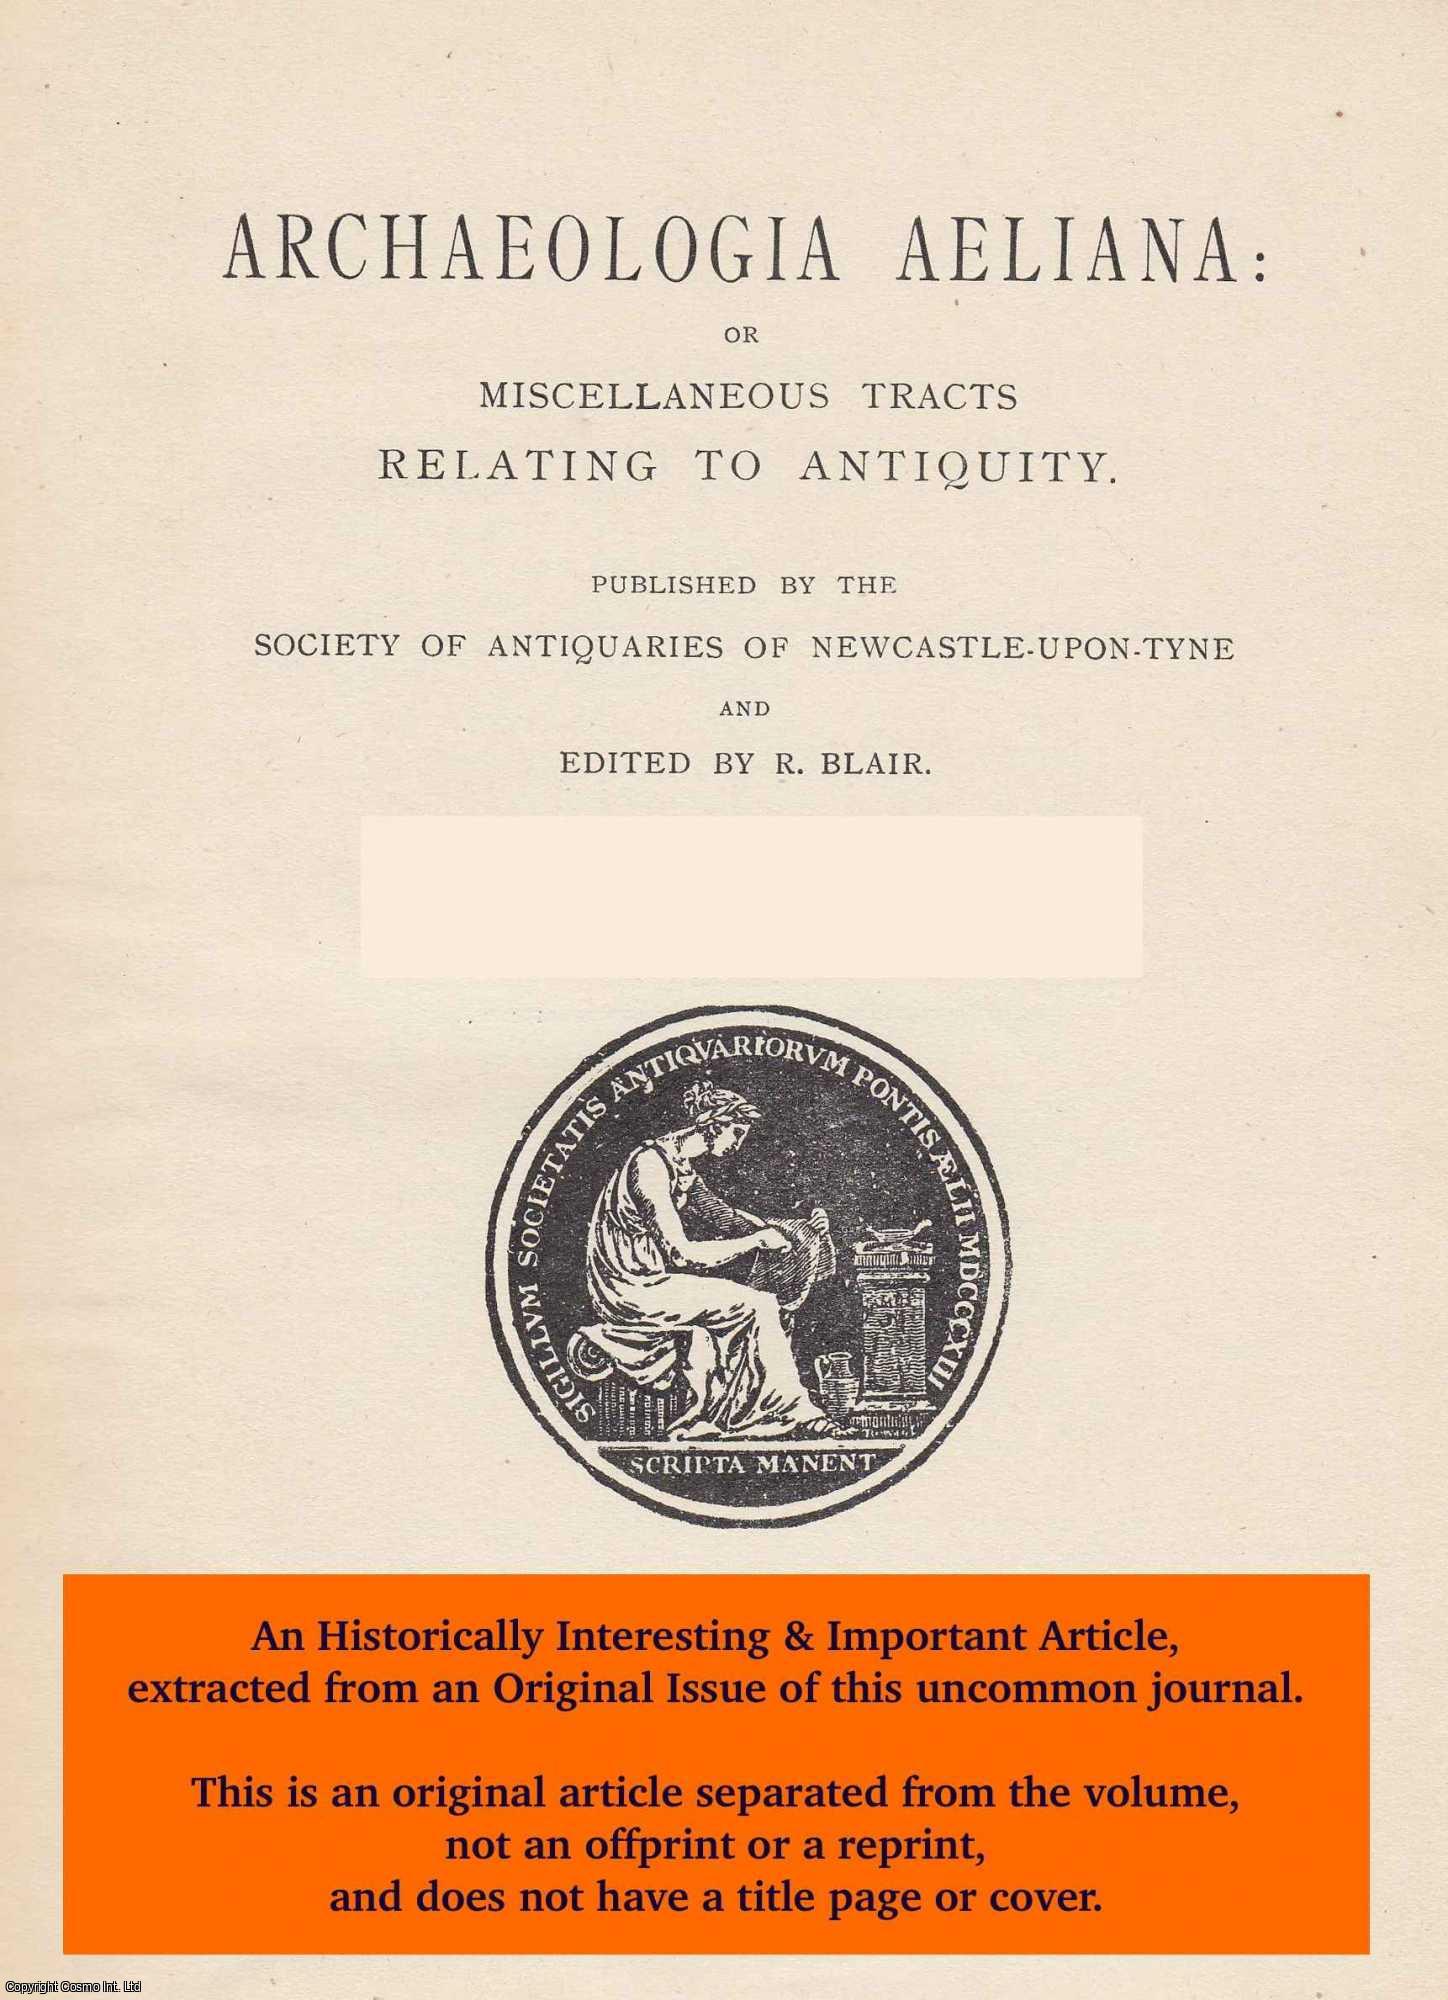 Edward Hughes, Edward - Some Clavering Correspondence. An original article from The Archaeologia Aeliana: or Miscellaneous Tracts Relating to Antiquity, 1956.